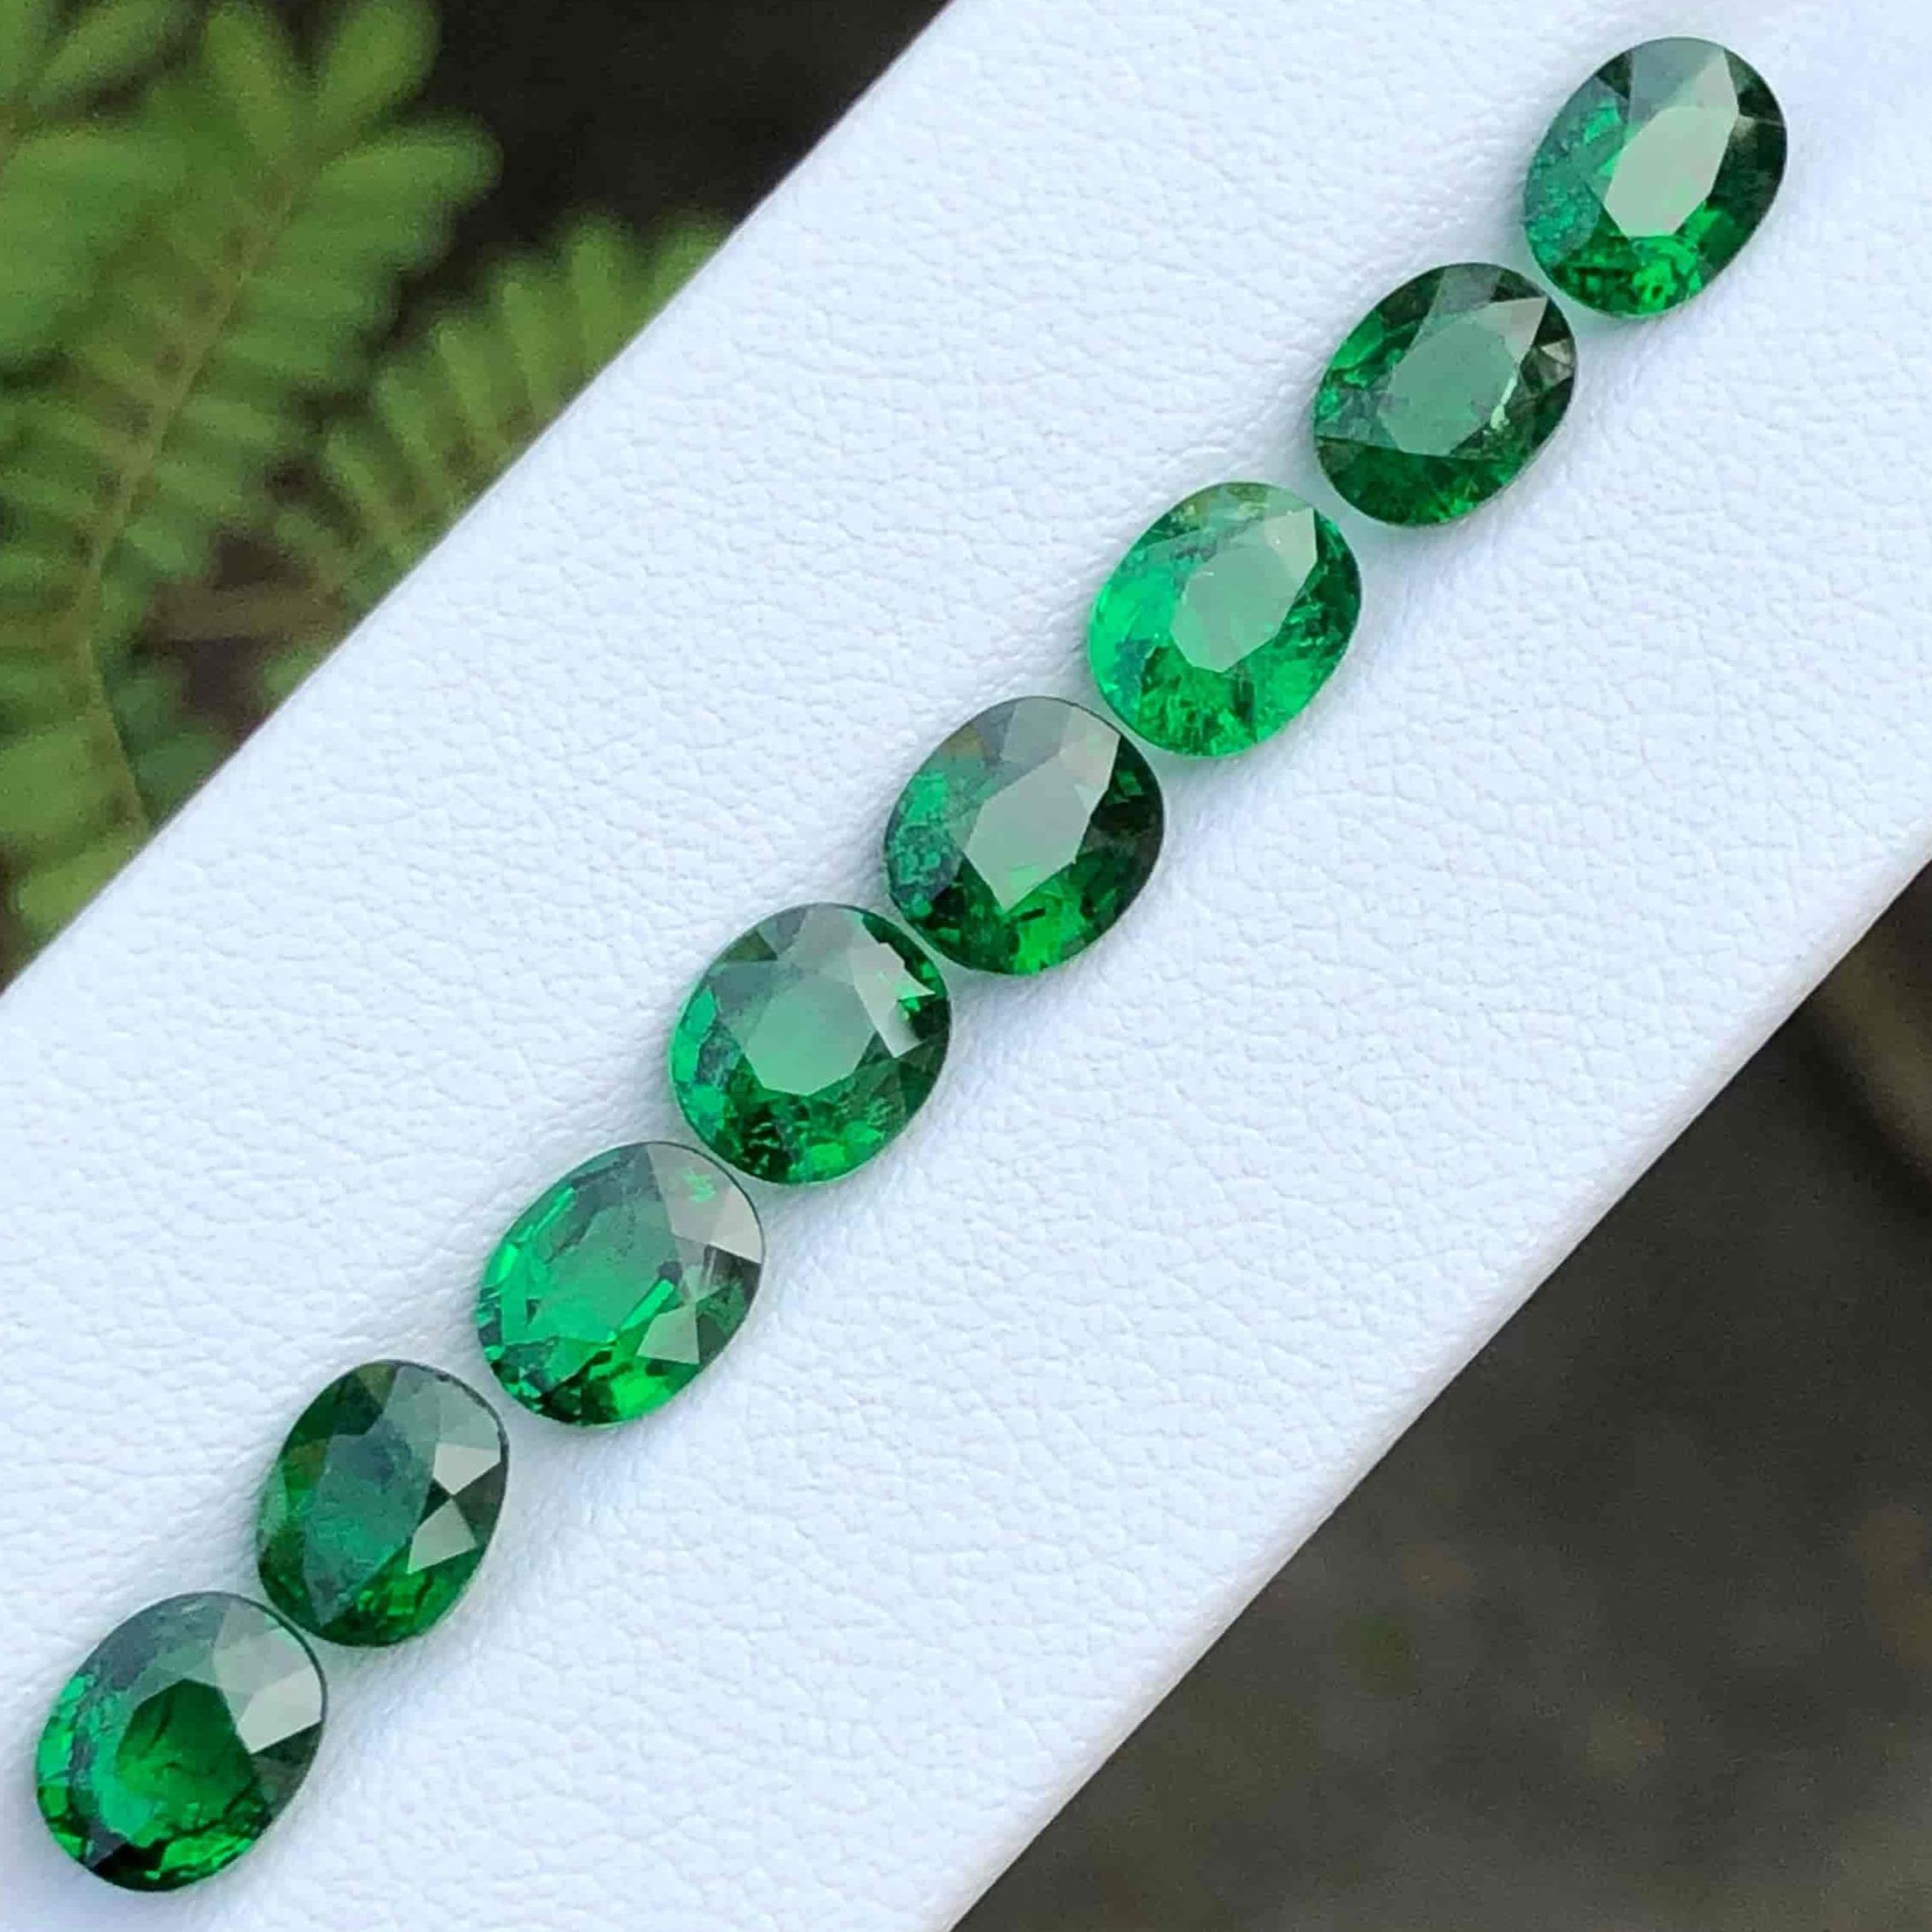 Gemstone Type Natural Tsavorite Gemstones Lot
Weight 12.20 carats
Dimensions 7 to 8 x 5.5 to 6.5 mm
Clarity Slightly Included (SI)
Shape Oval Cut
Origin Kenya
Treatment None





Indulge in the allure of nature's vivid beauty with this remarkable